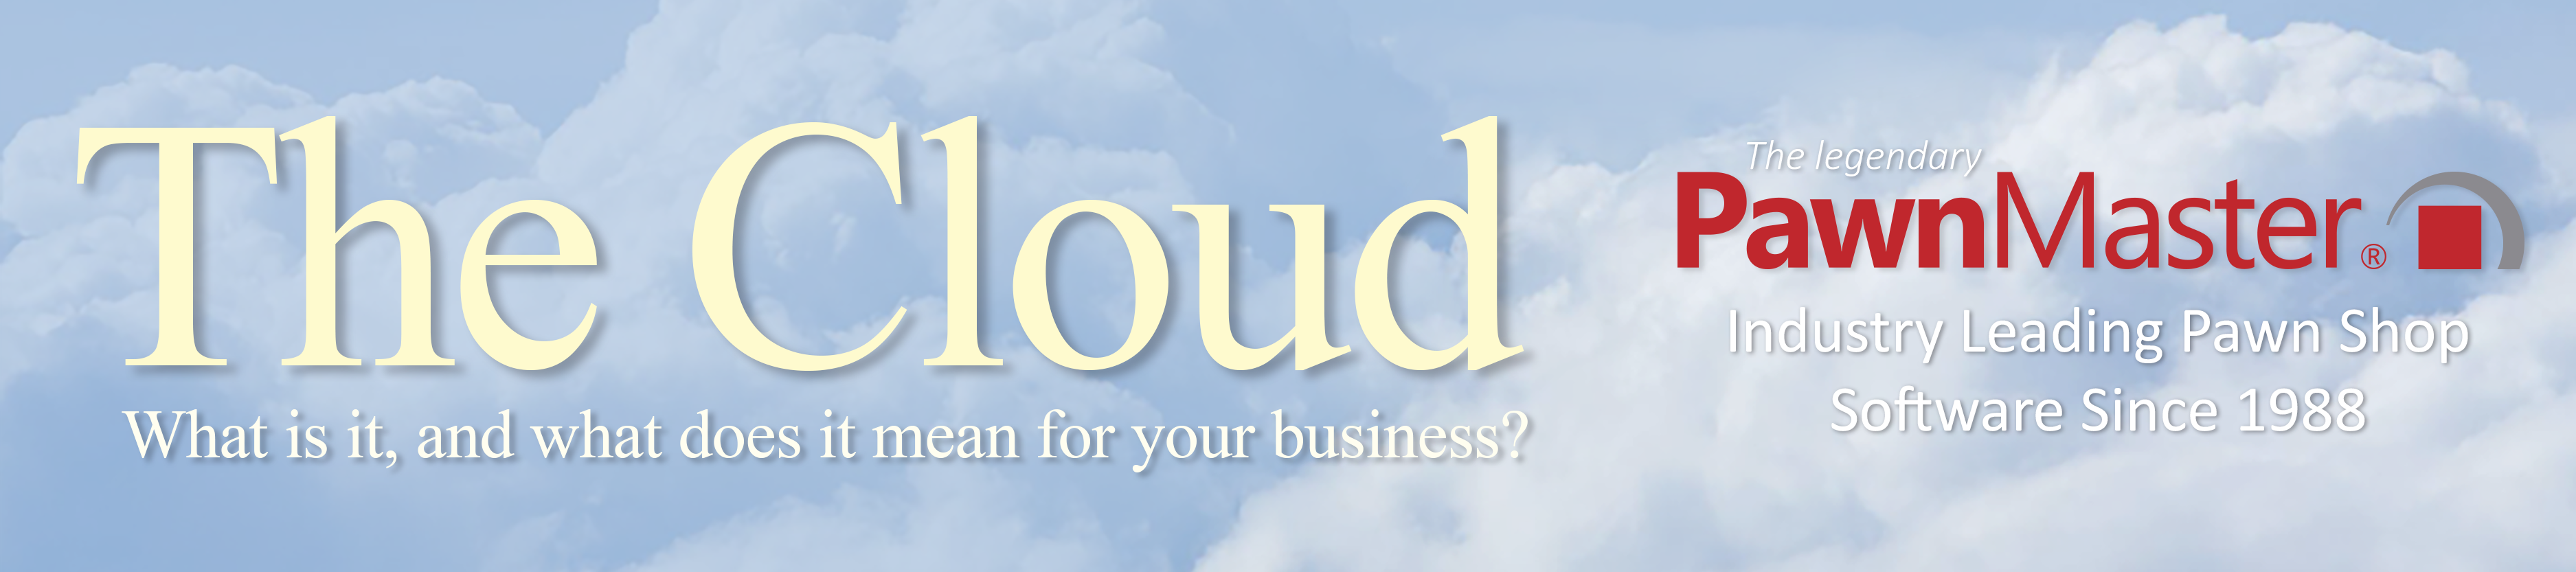 header-TheCloud.png